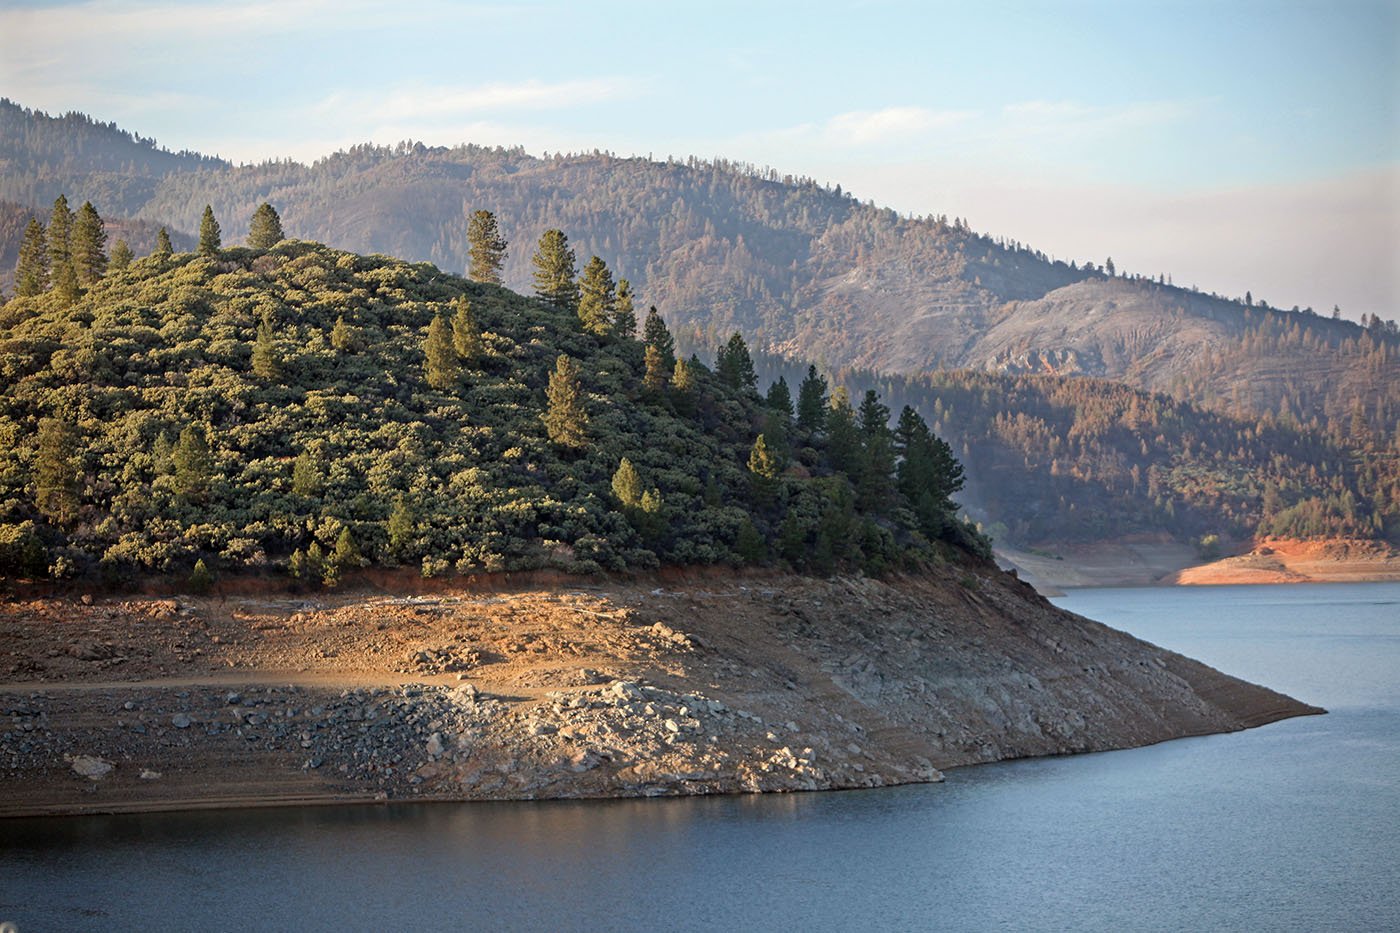  Shasta Reservoir — When the water level dips below full capacity, it forms a “bathtub ring” all the way around Shasta Reservoir. July 12, 2021. Tom Levy/The Spiritual Edge   